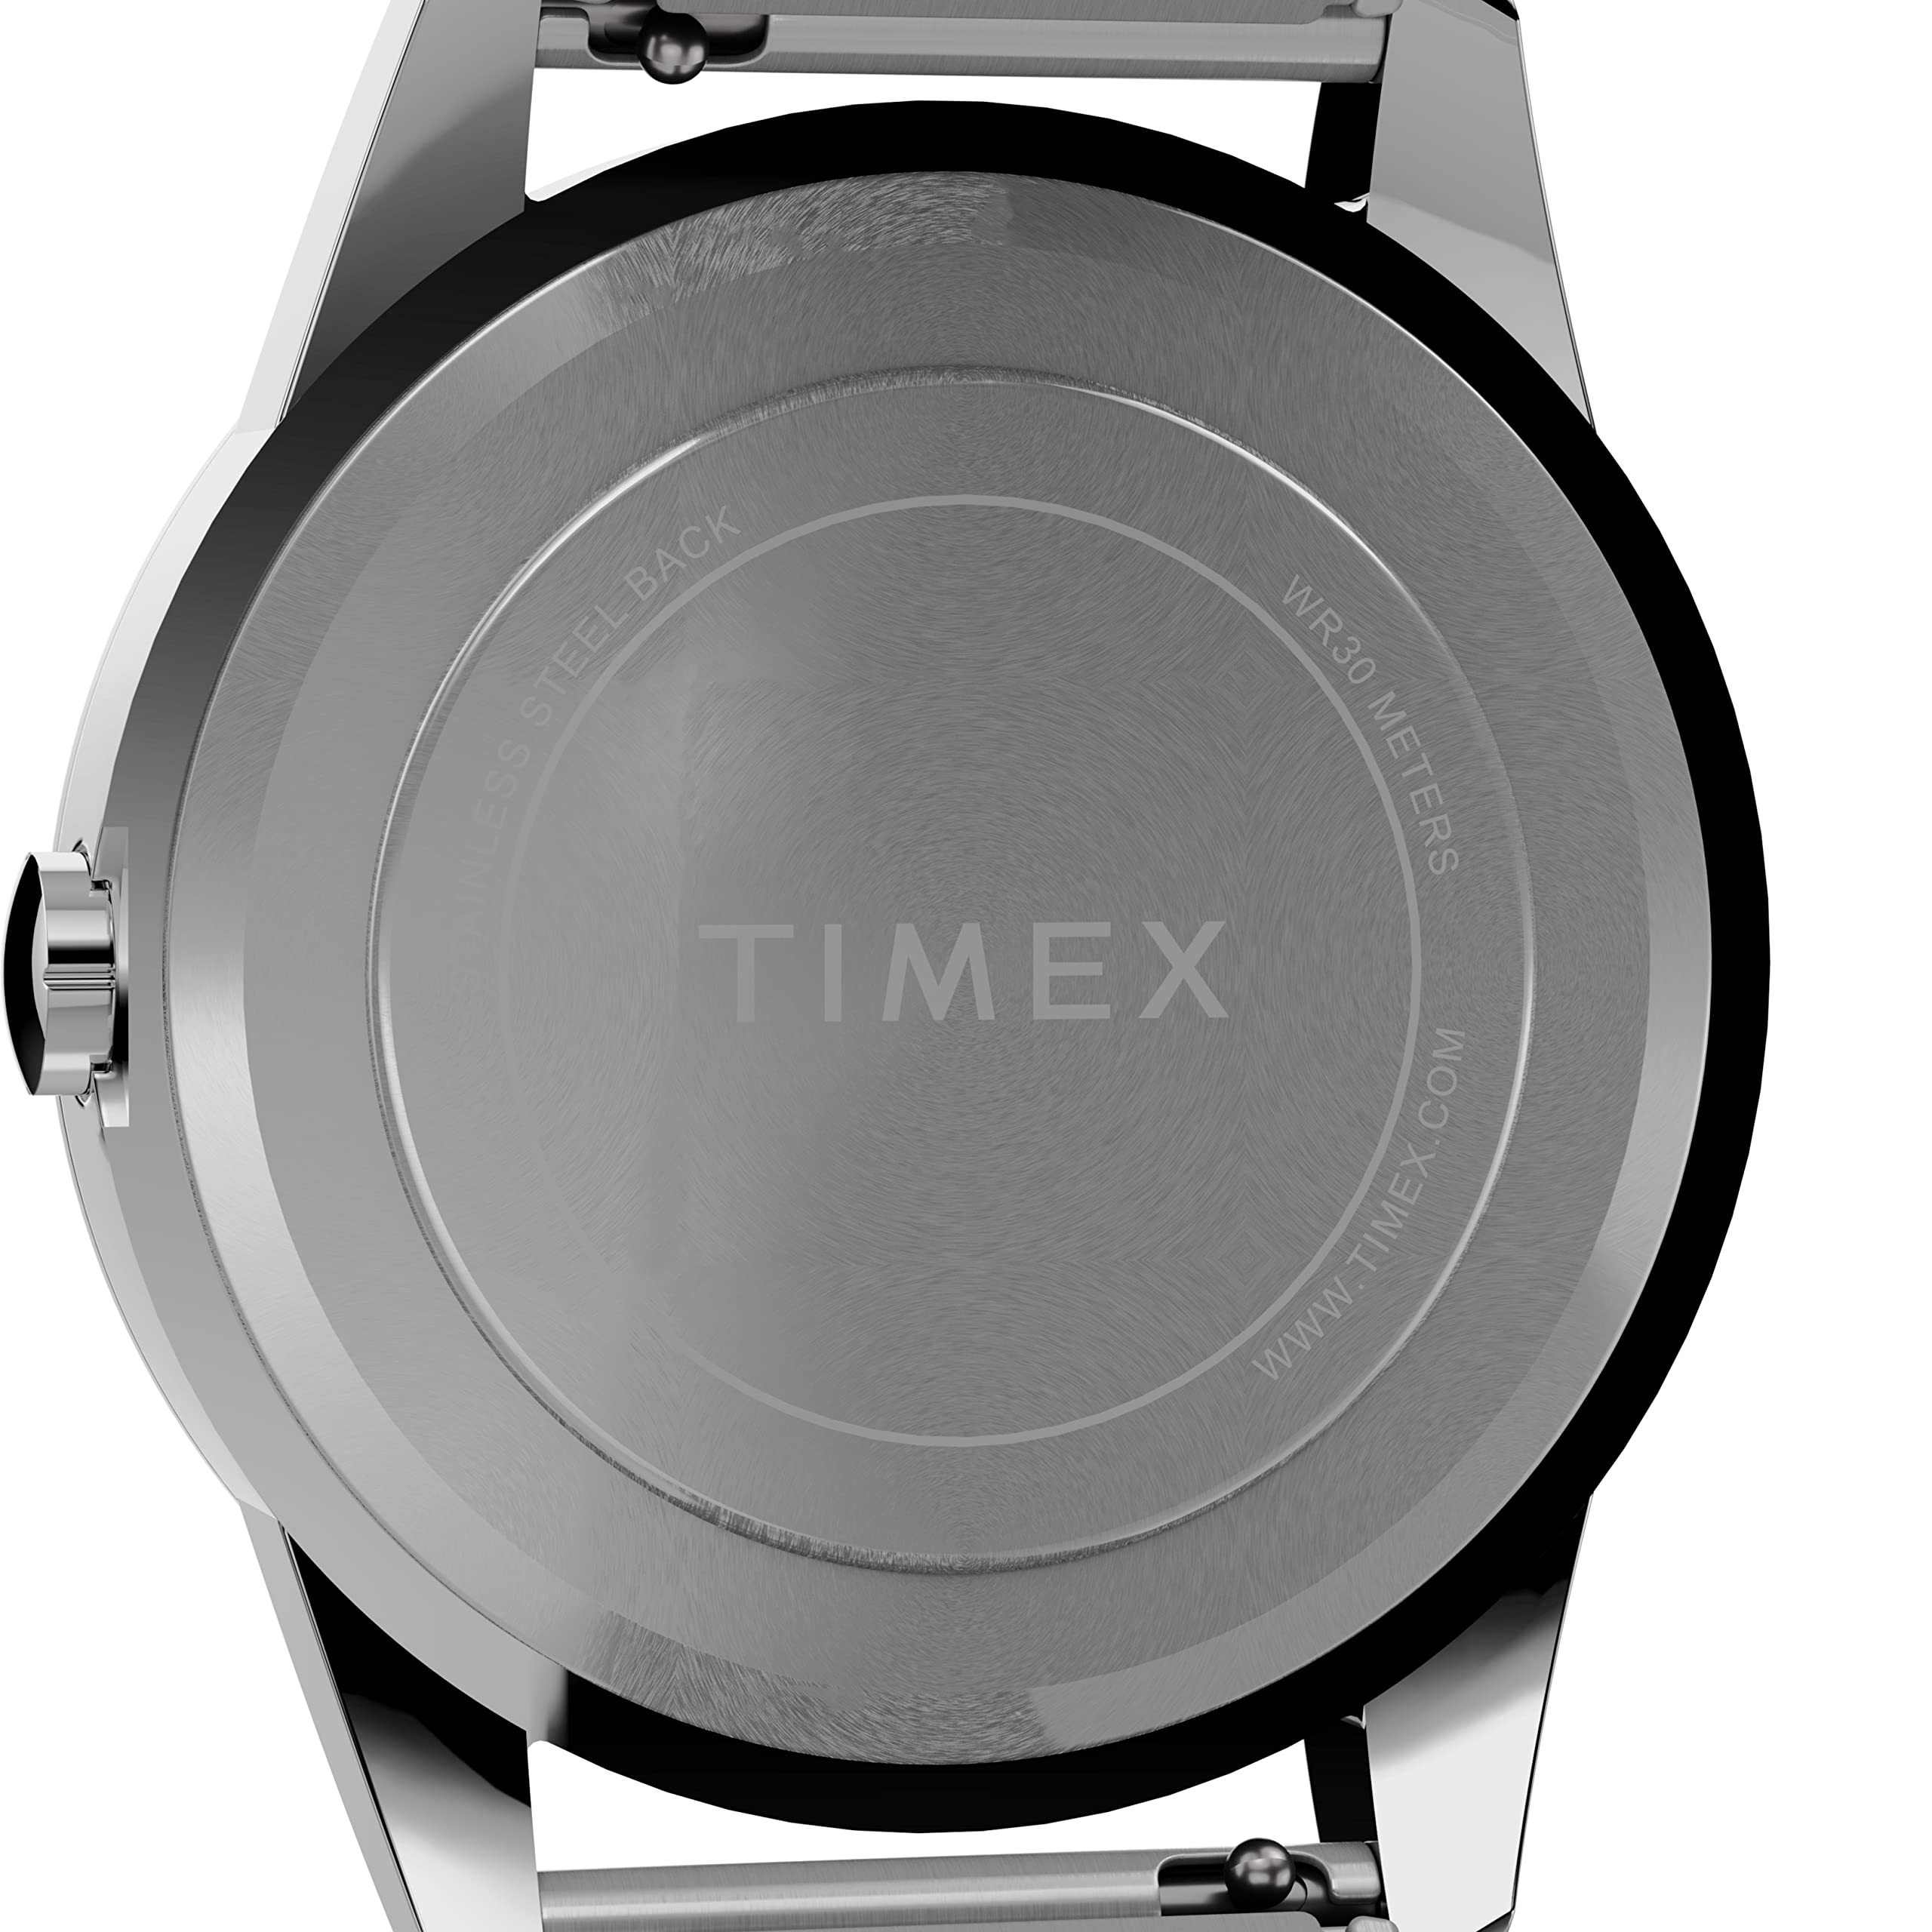 Timex Men's South Street Sport 36mm Watch Box Set – Silver-Tone Case Black Dial with Silver-Tone Expansion Band + Black Leather Strap